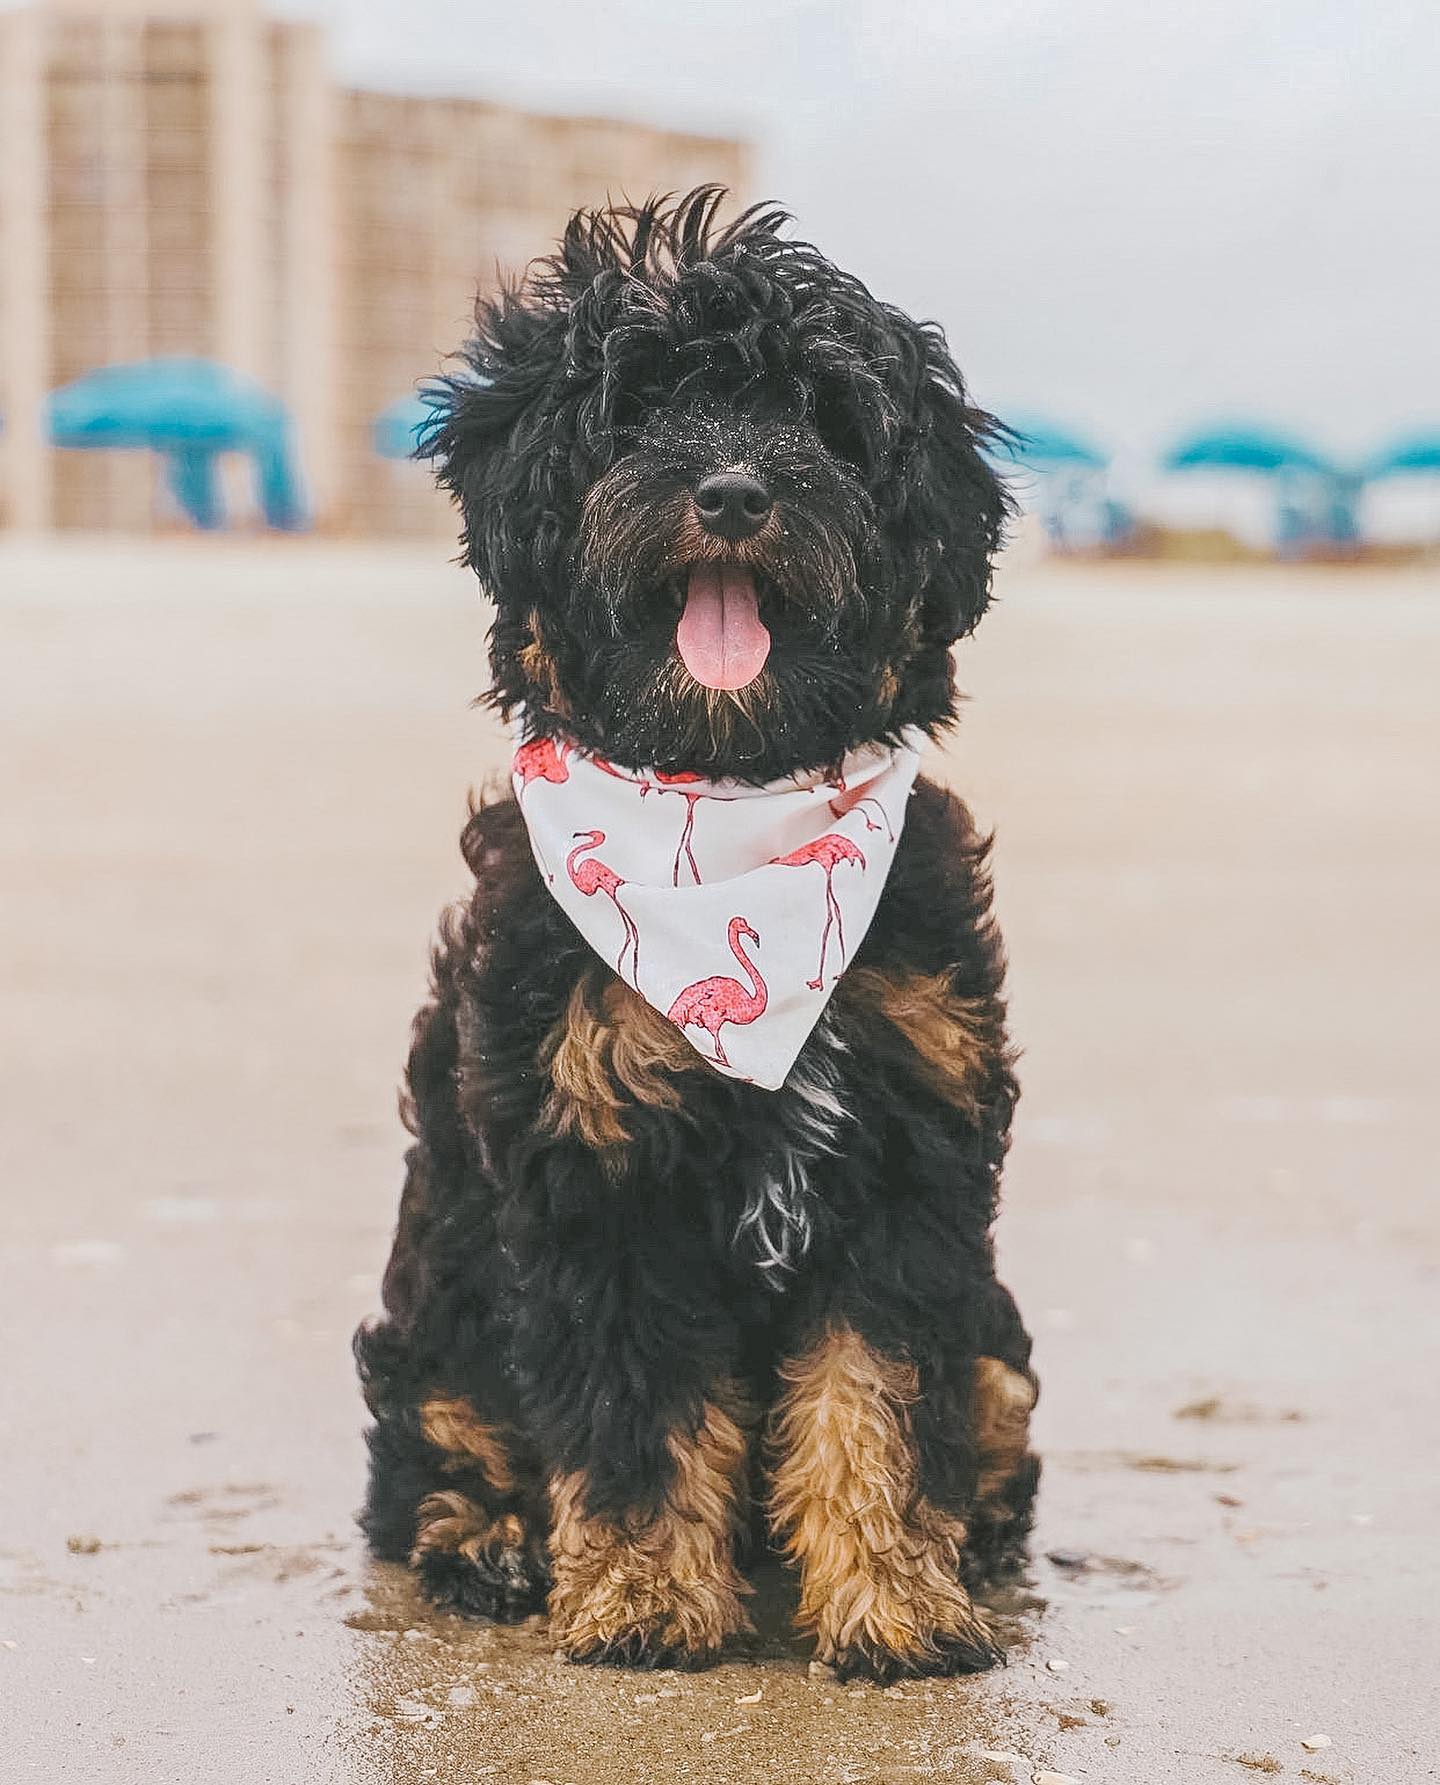 The Wookie golden doodle on the beach wearing a bandanna is a sight to behold! His fur is so shiny in the sun and his bandanna matched perfectly with his outfit. This heroic dog is sure to make all beach goers smile.